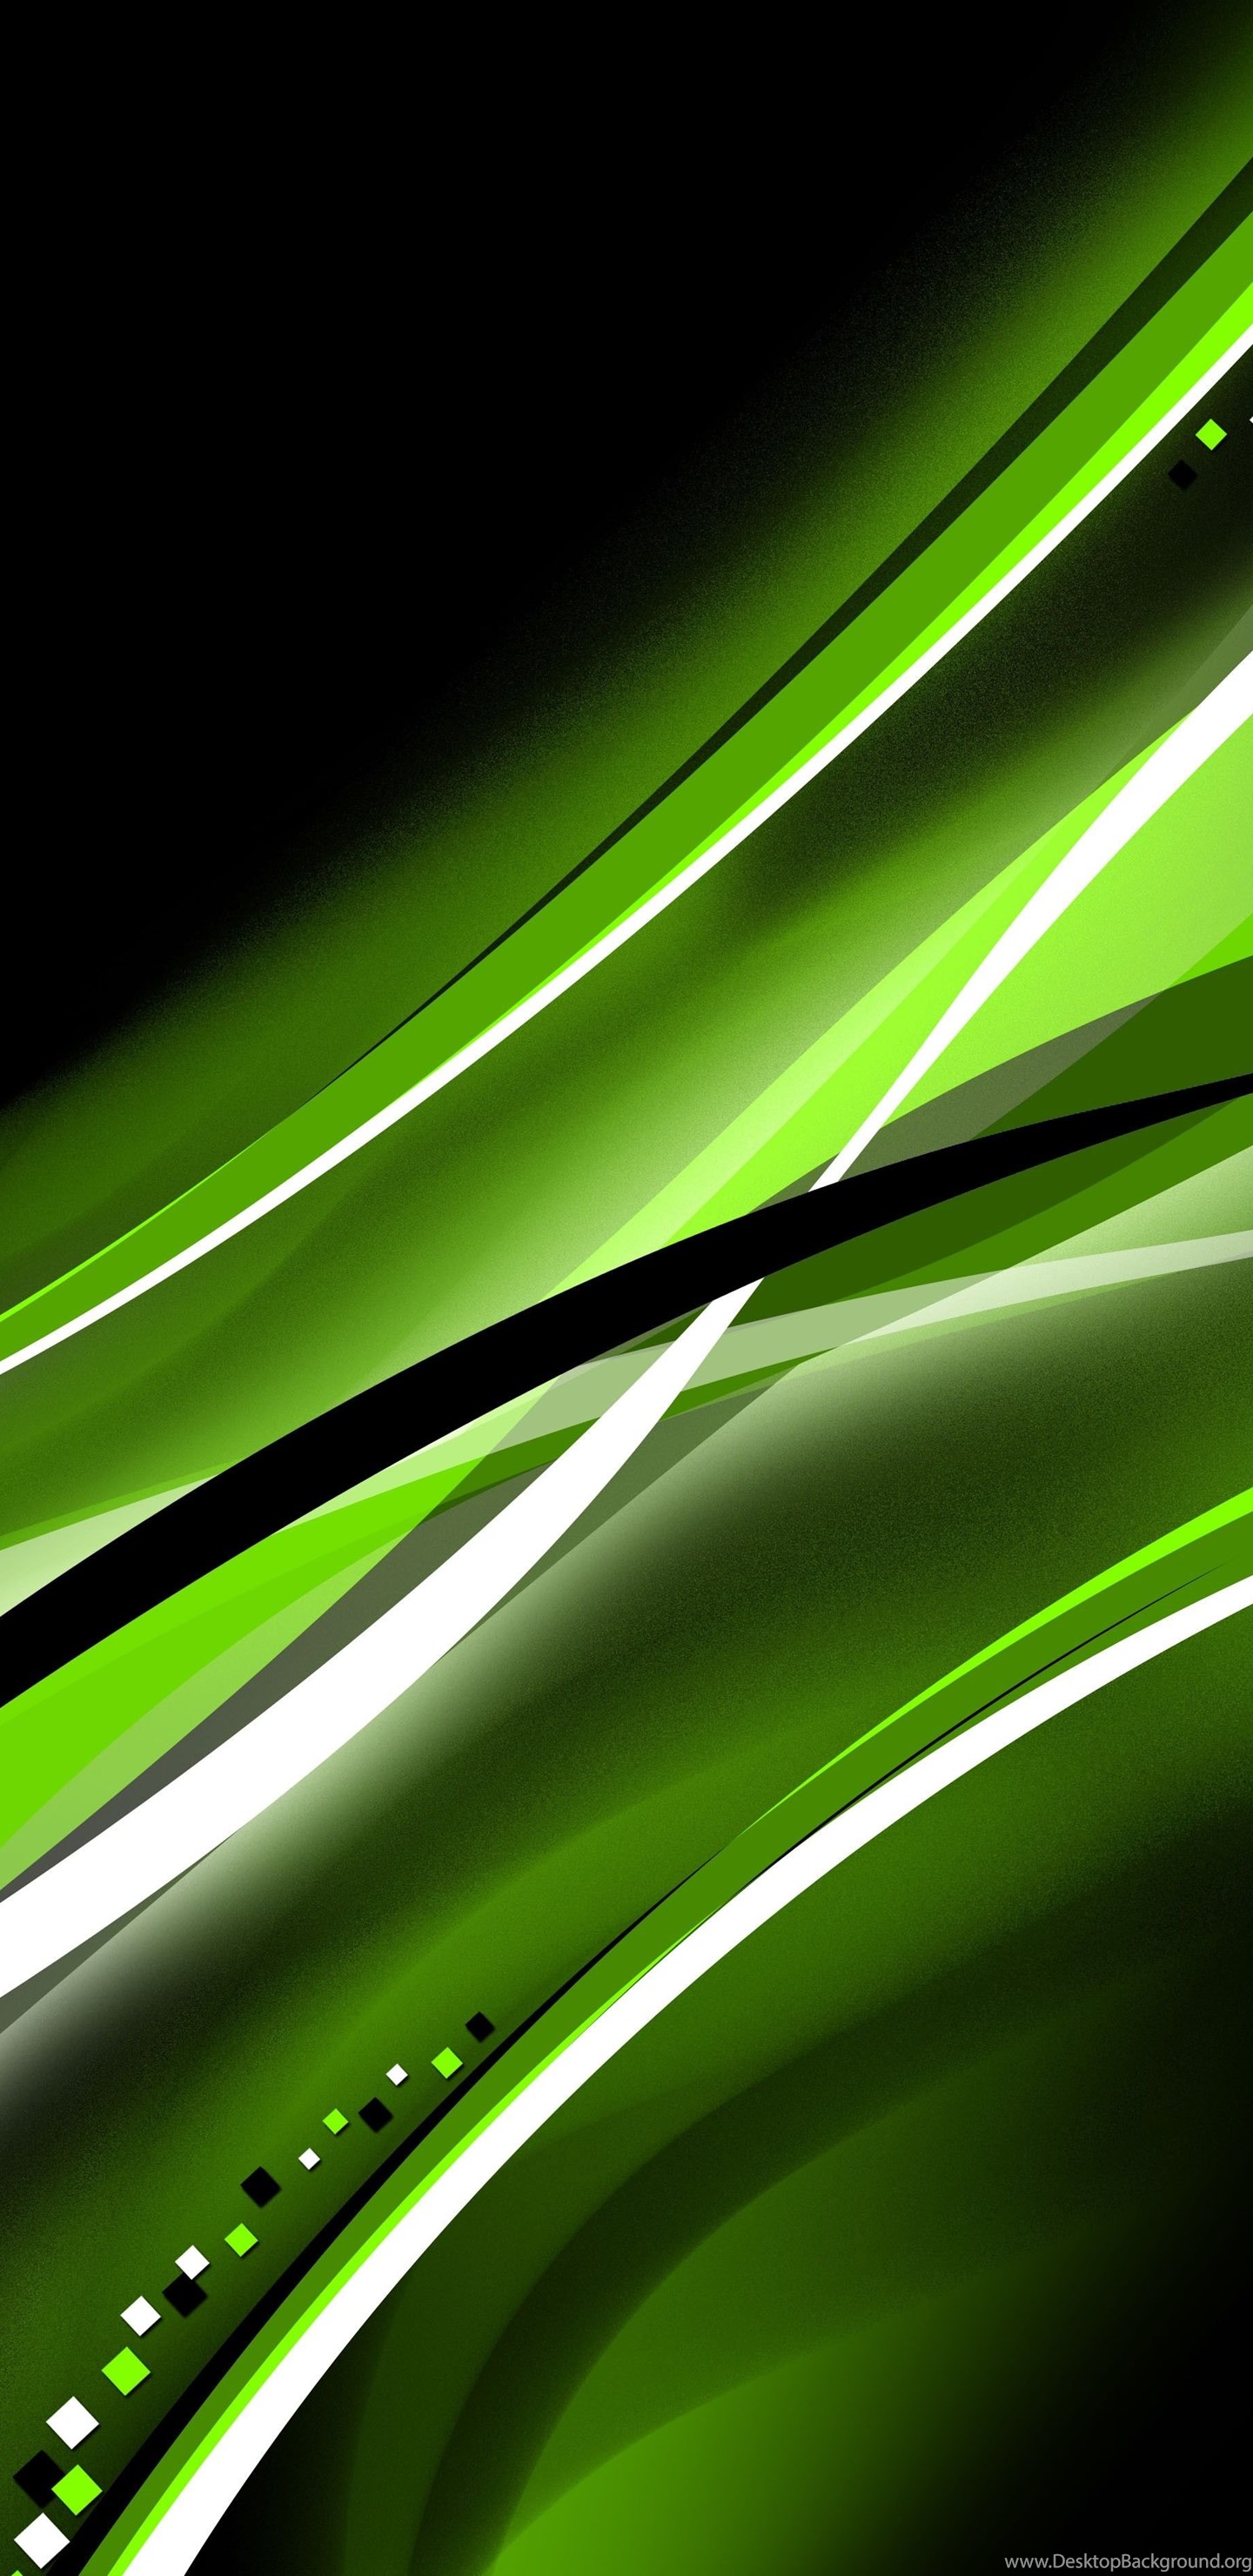 Hd Abstract Green And Black Backgrounds Wallpapers Desktop Background